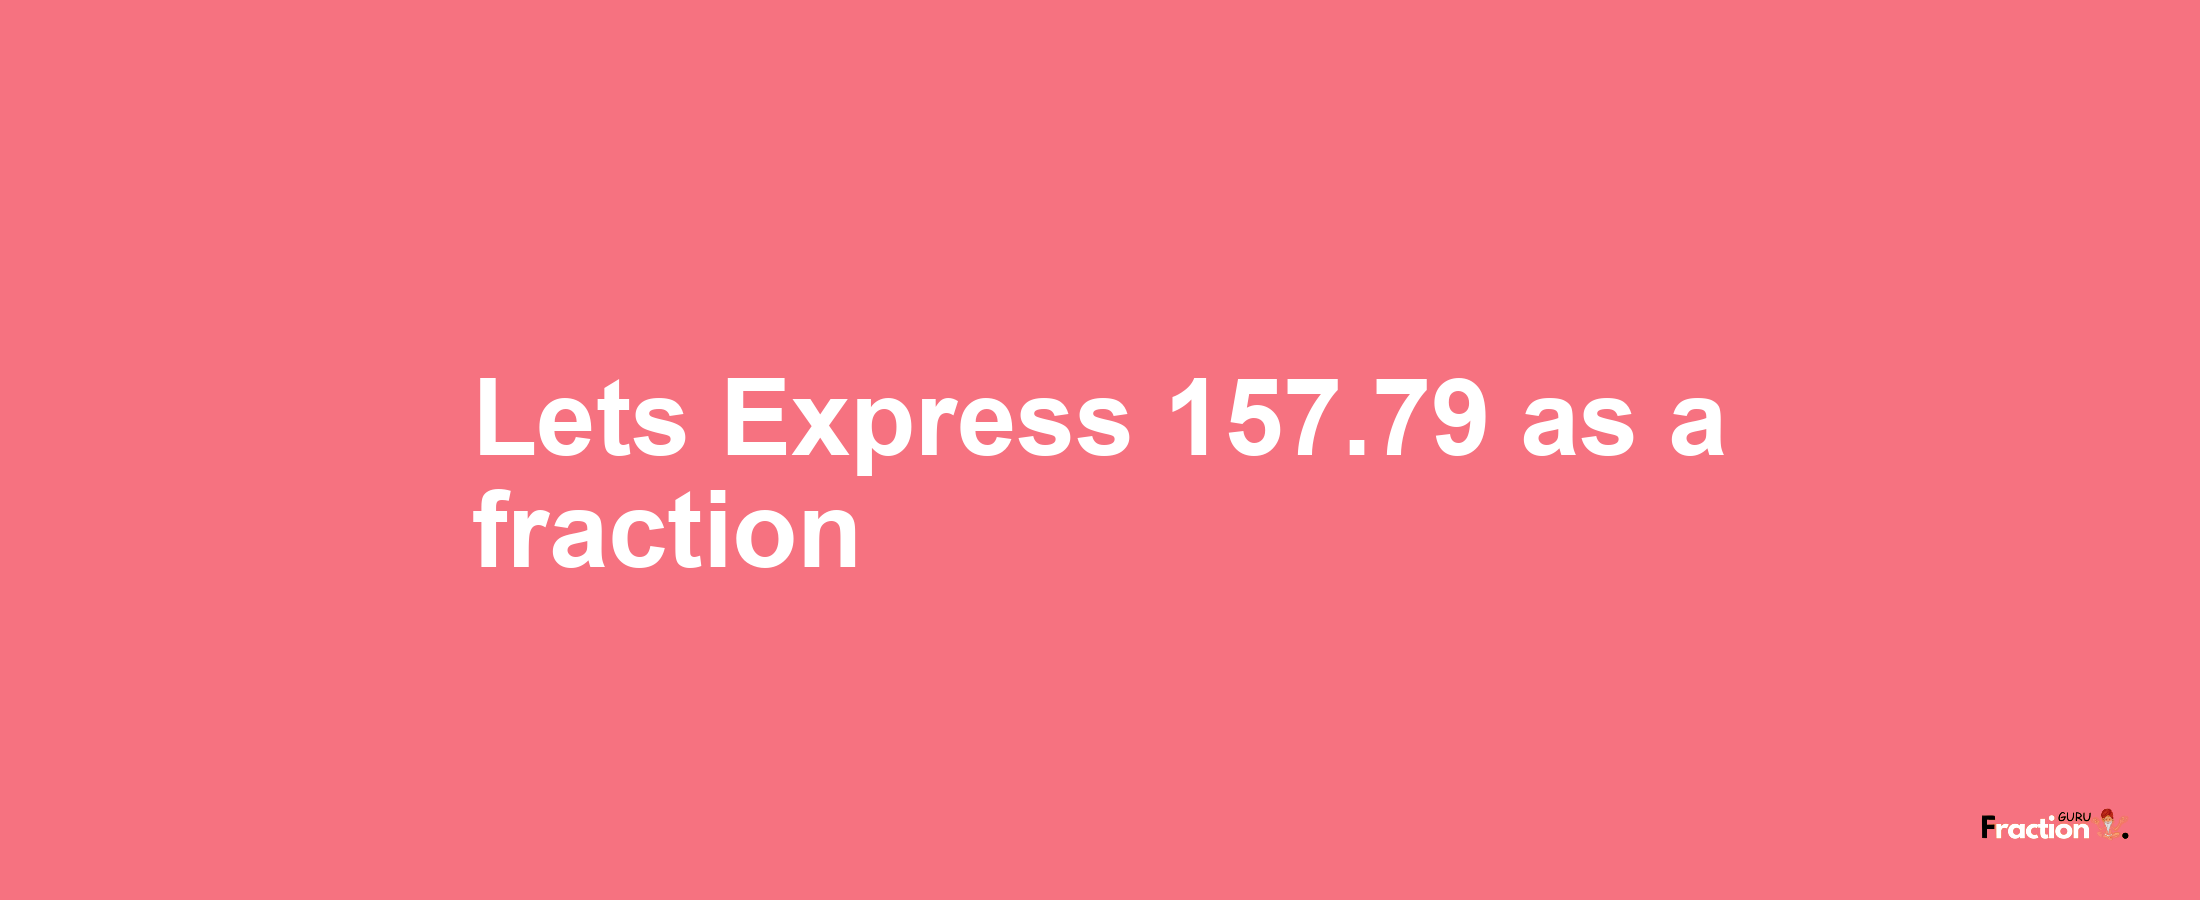 Lets Express 157.79 as afraction